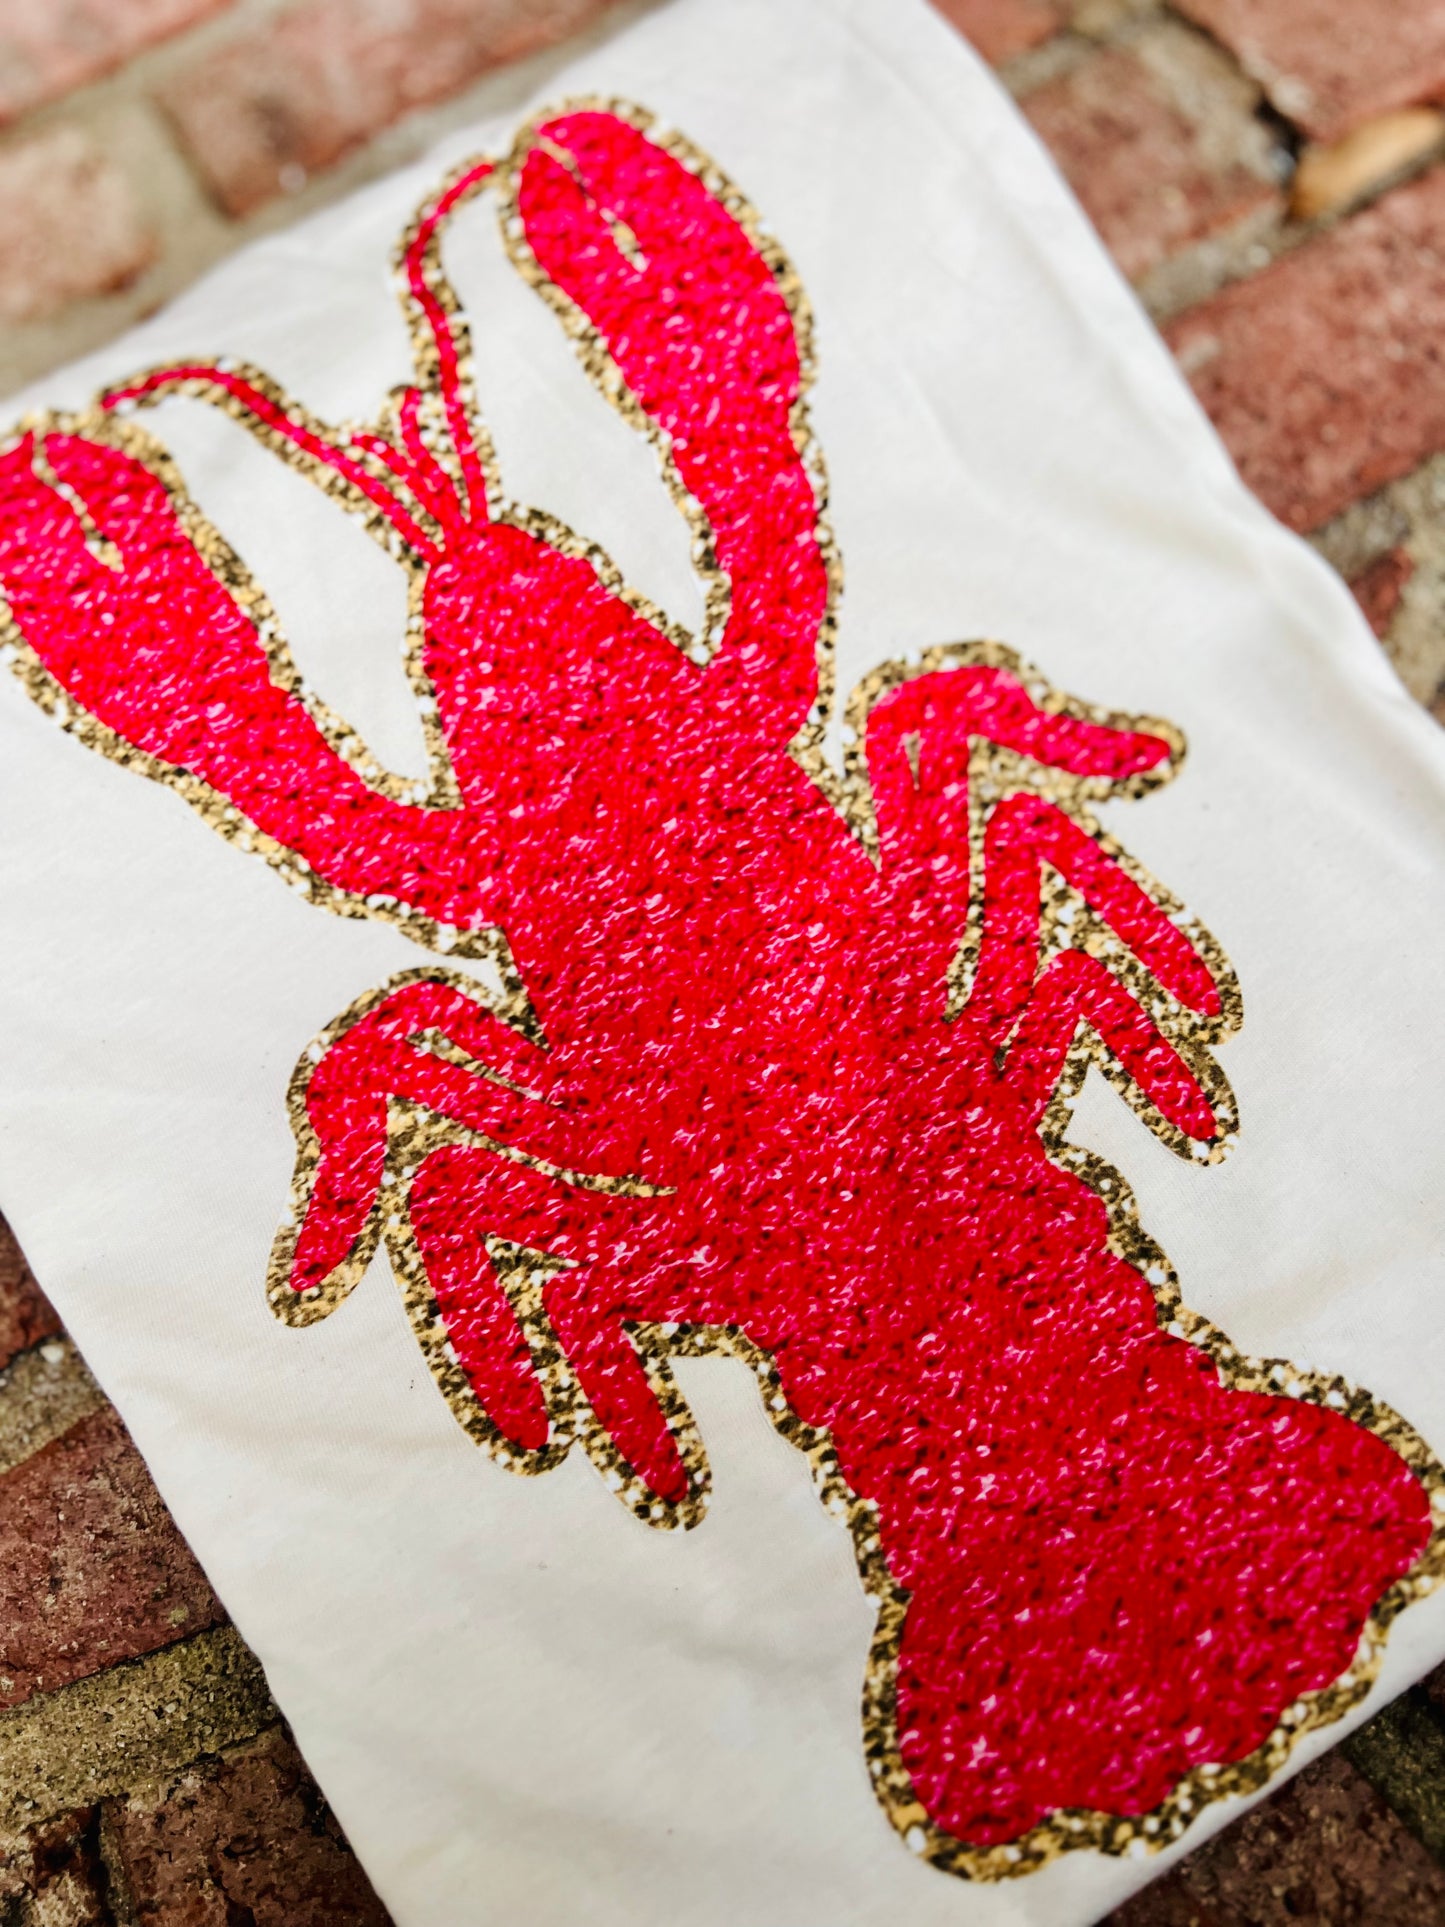 Faux Chenille Patch Crawfish Tee